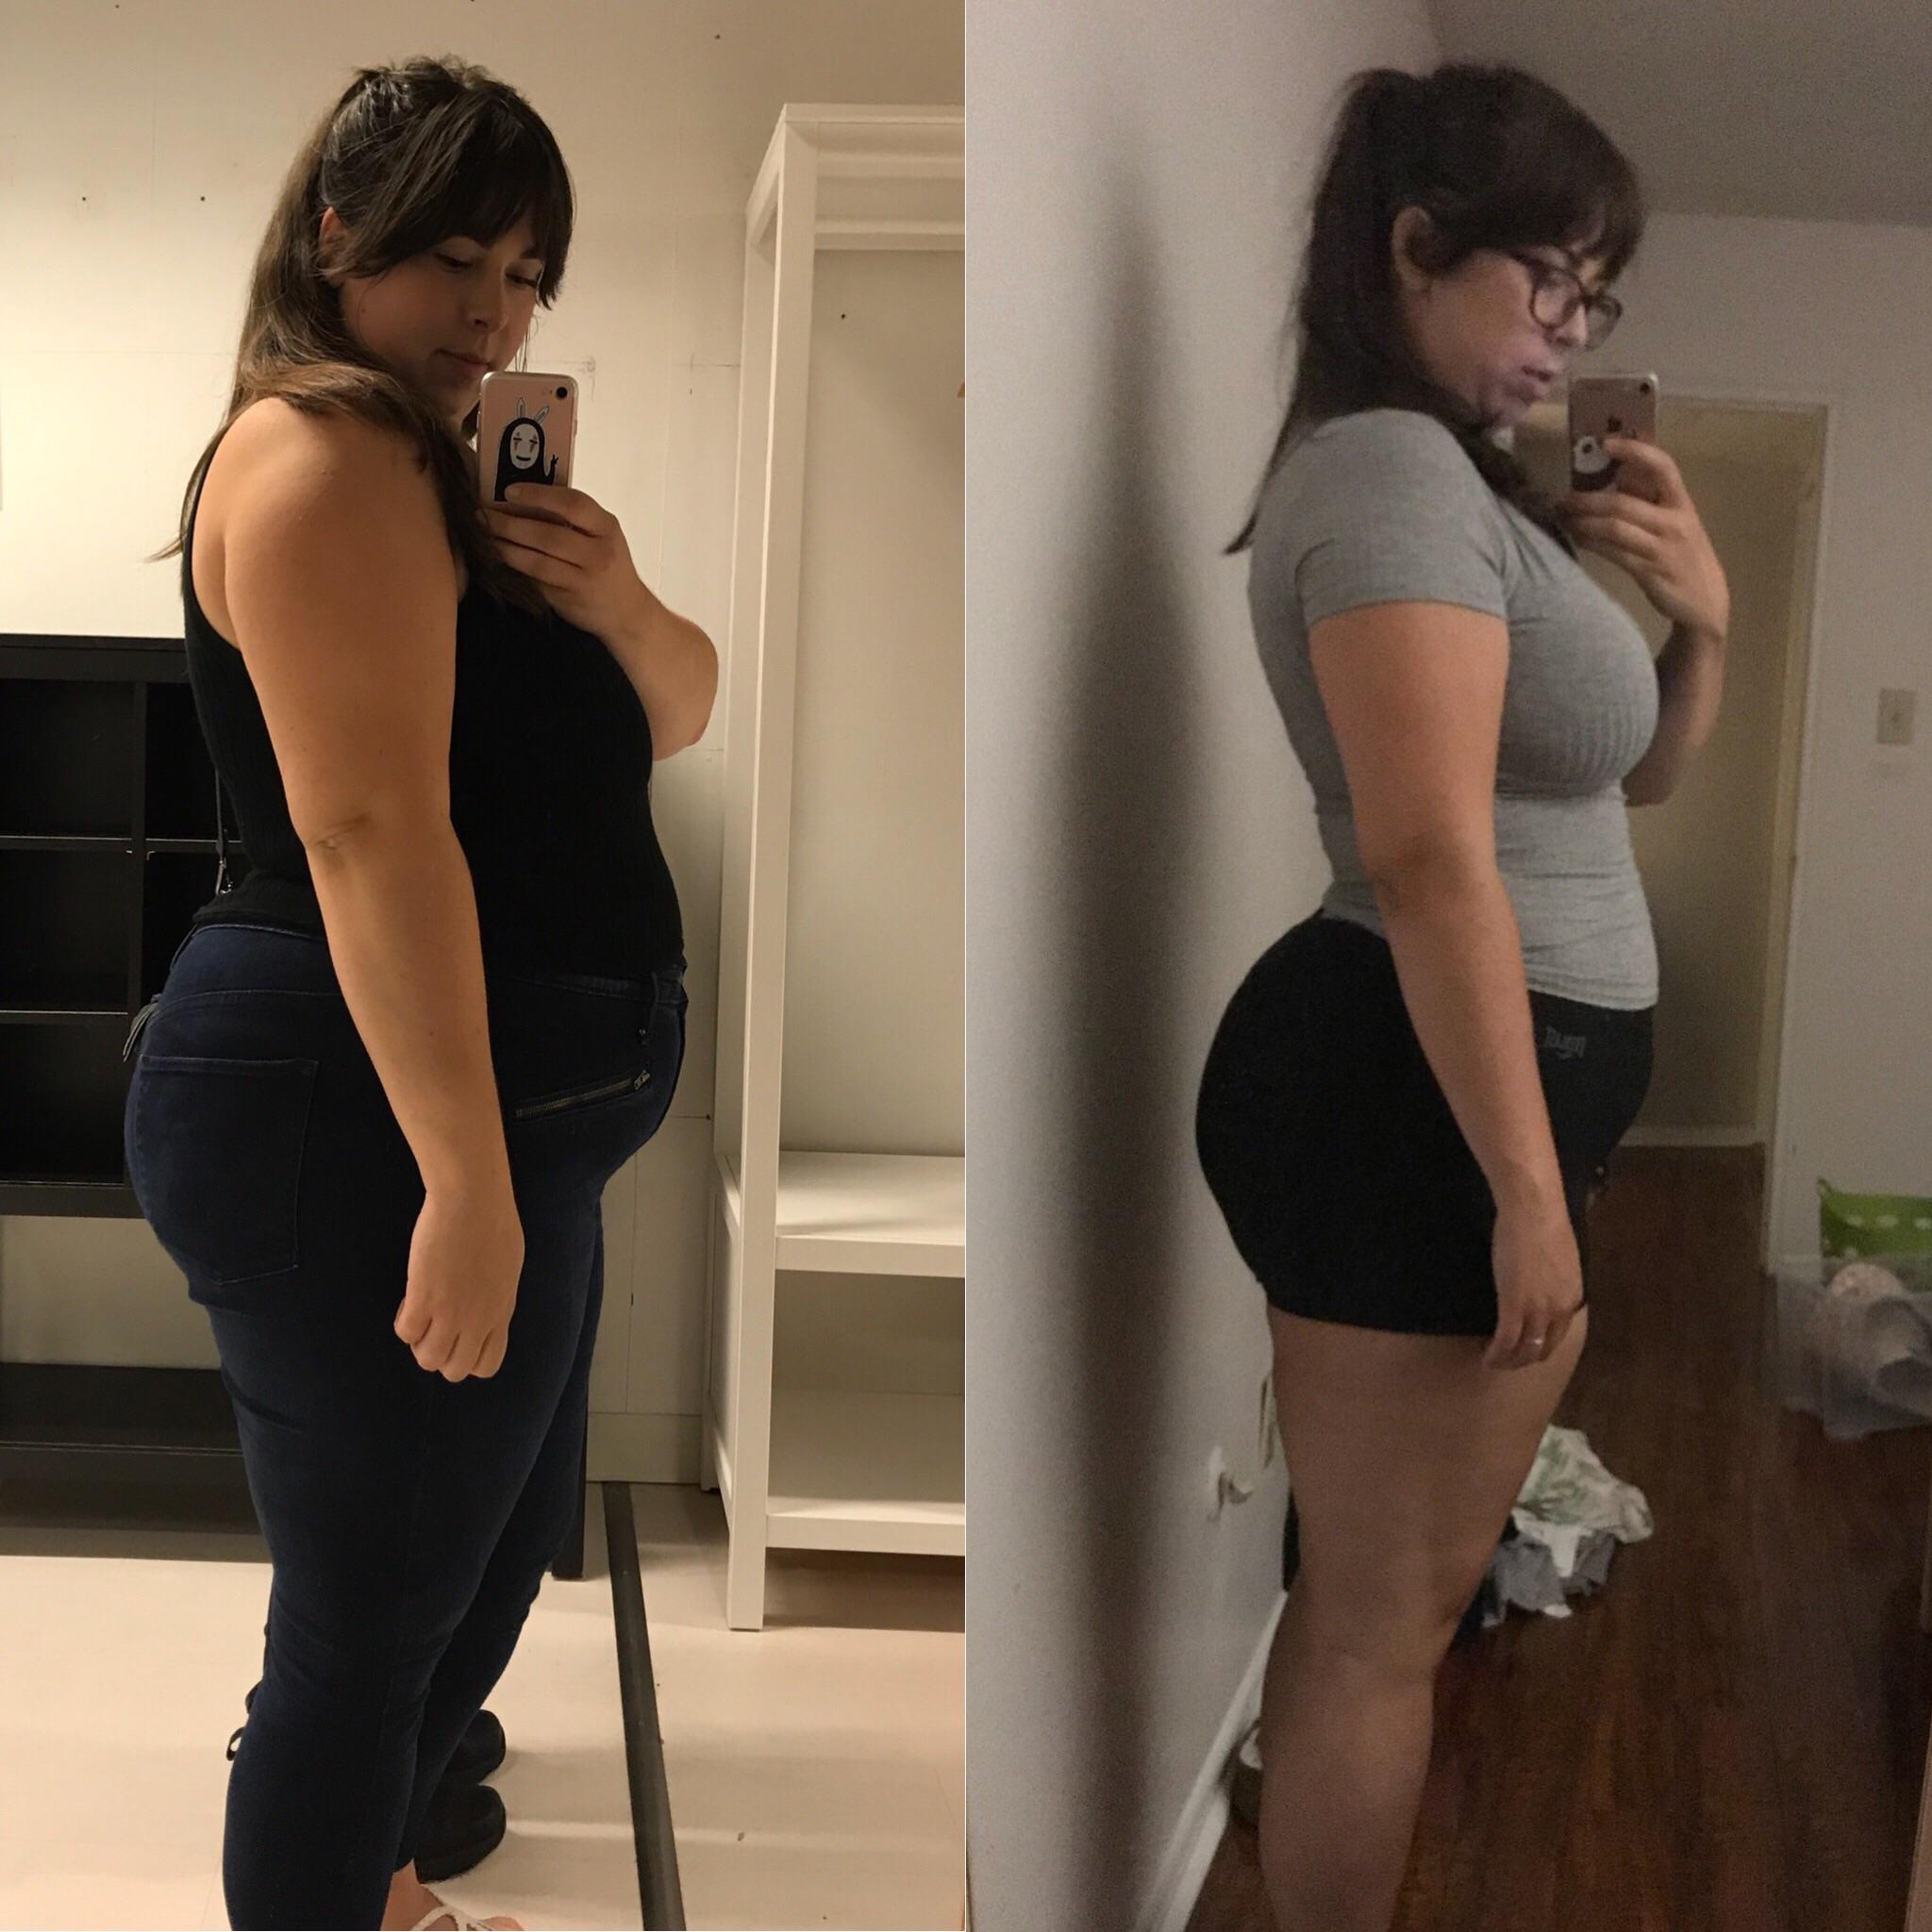 5 feet 8 Female Before and After 60 lbs Weight Loss 273 lbs to 213 lbs.